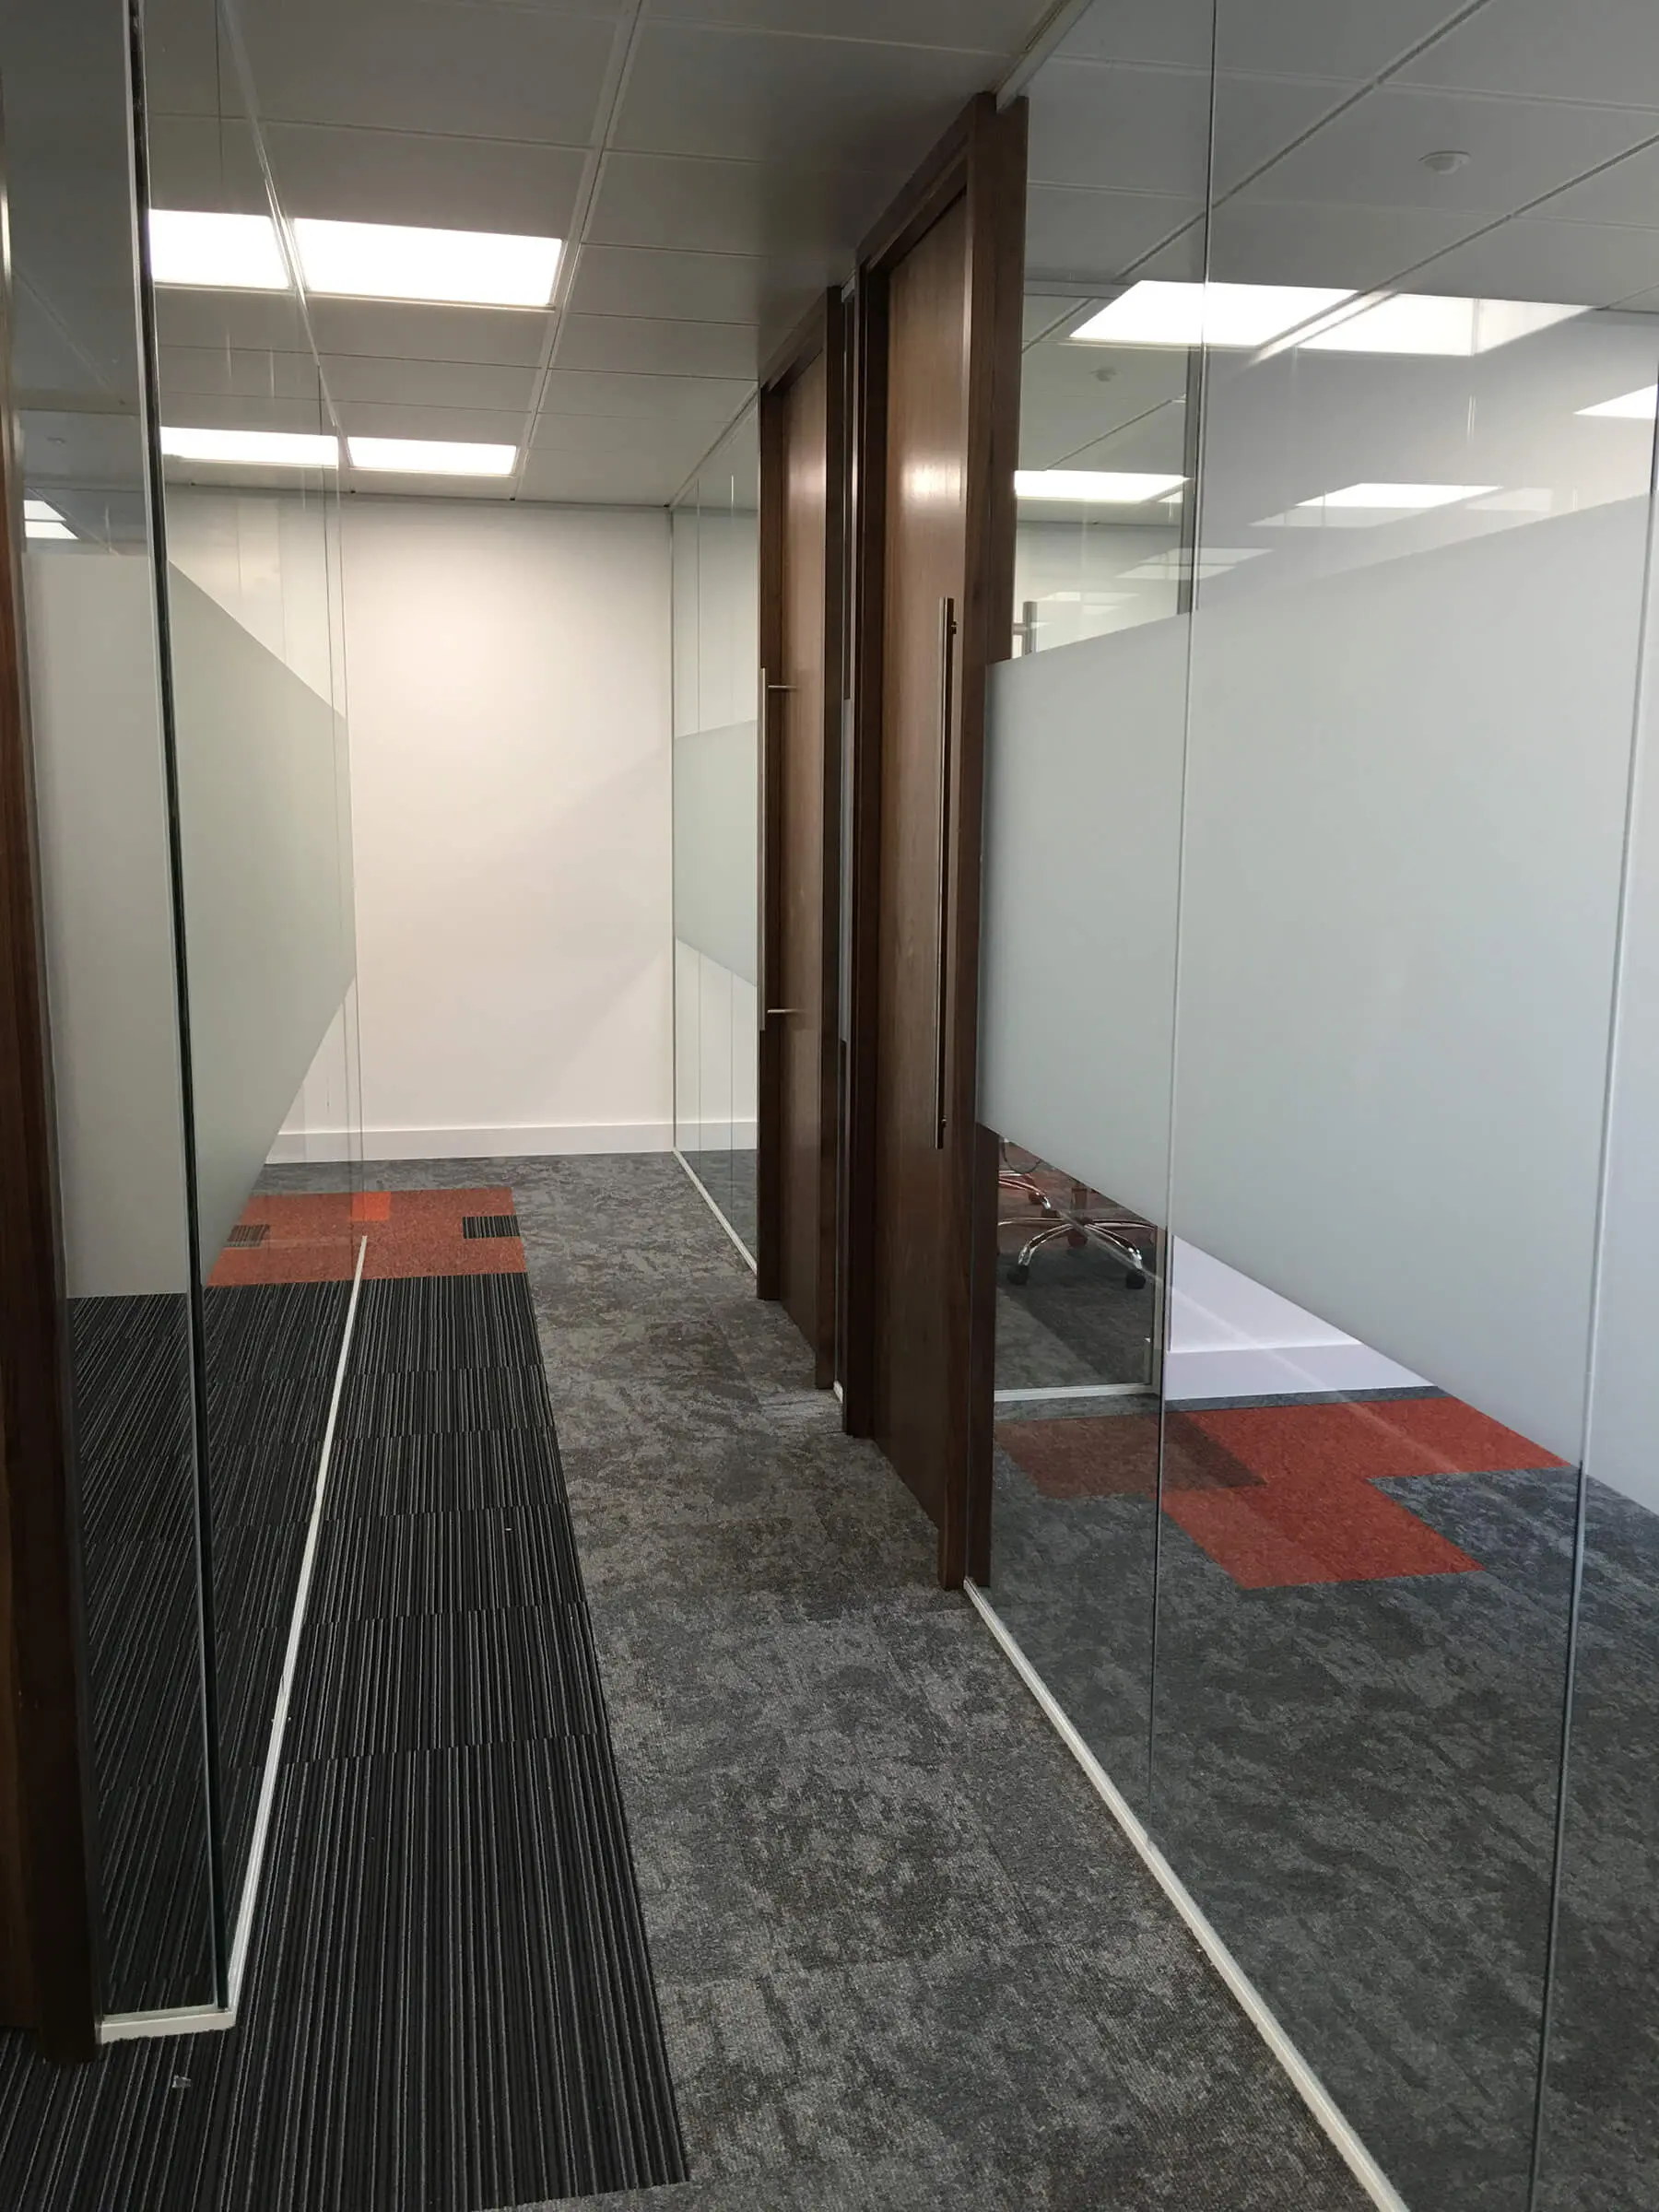 Designer floor and glass partitions in office